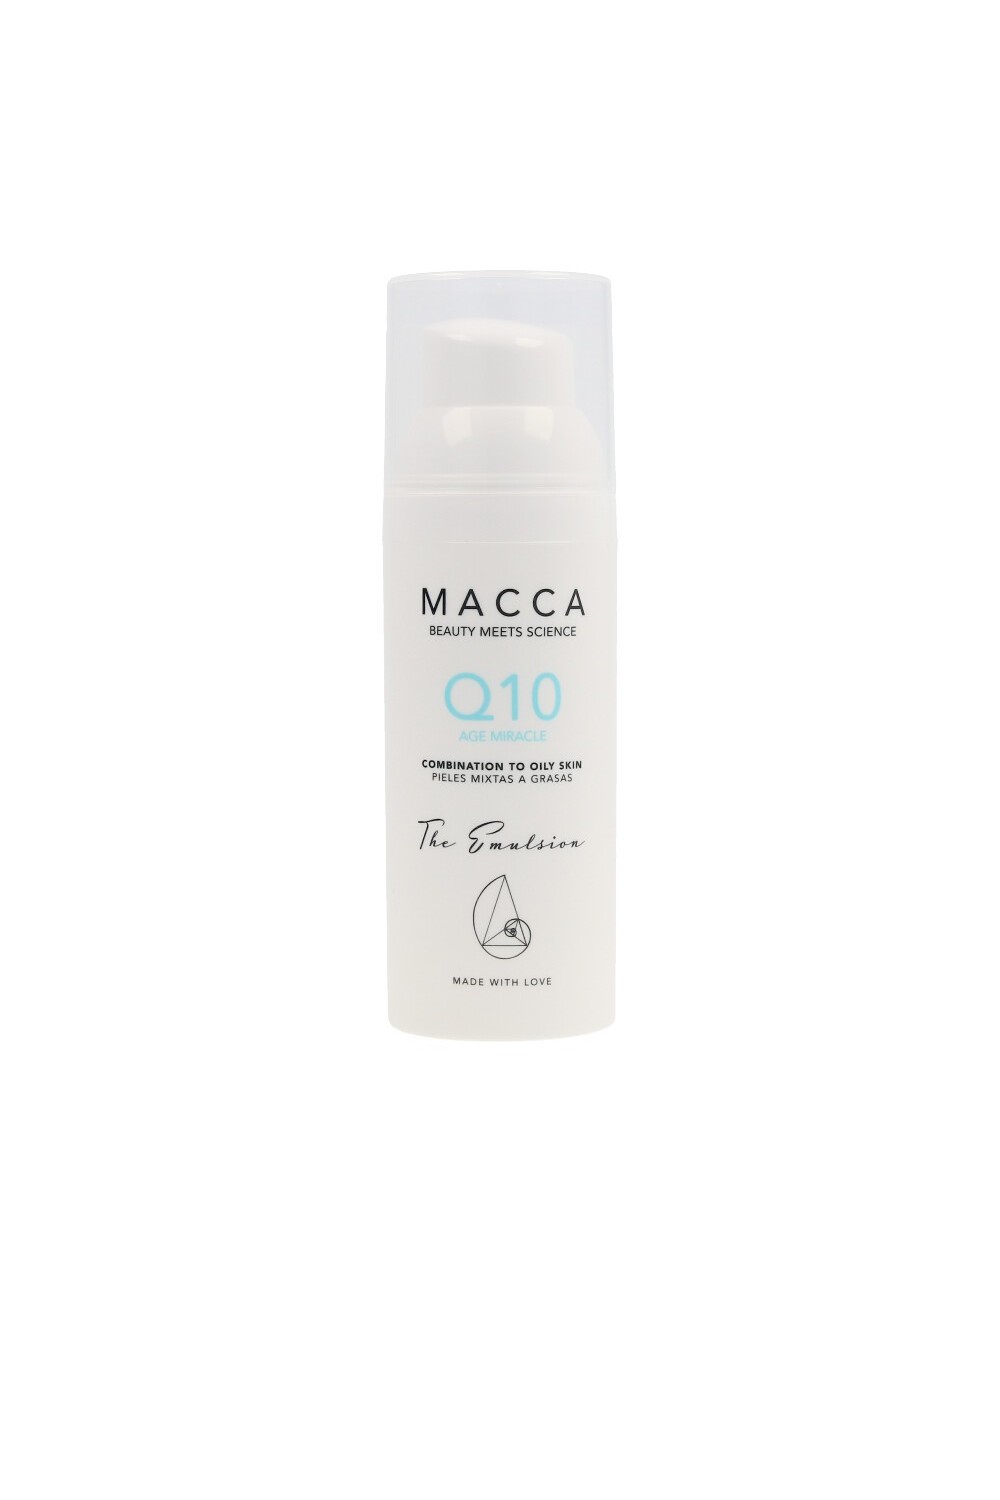 Macca Q10 Age Miracle The Emulsion 50ml